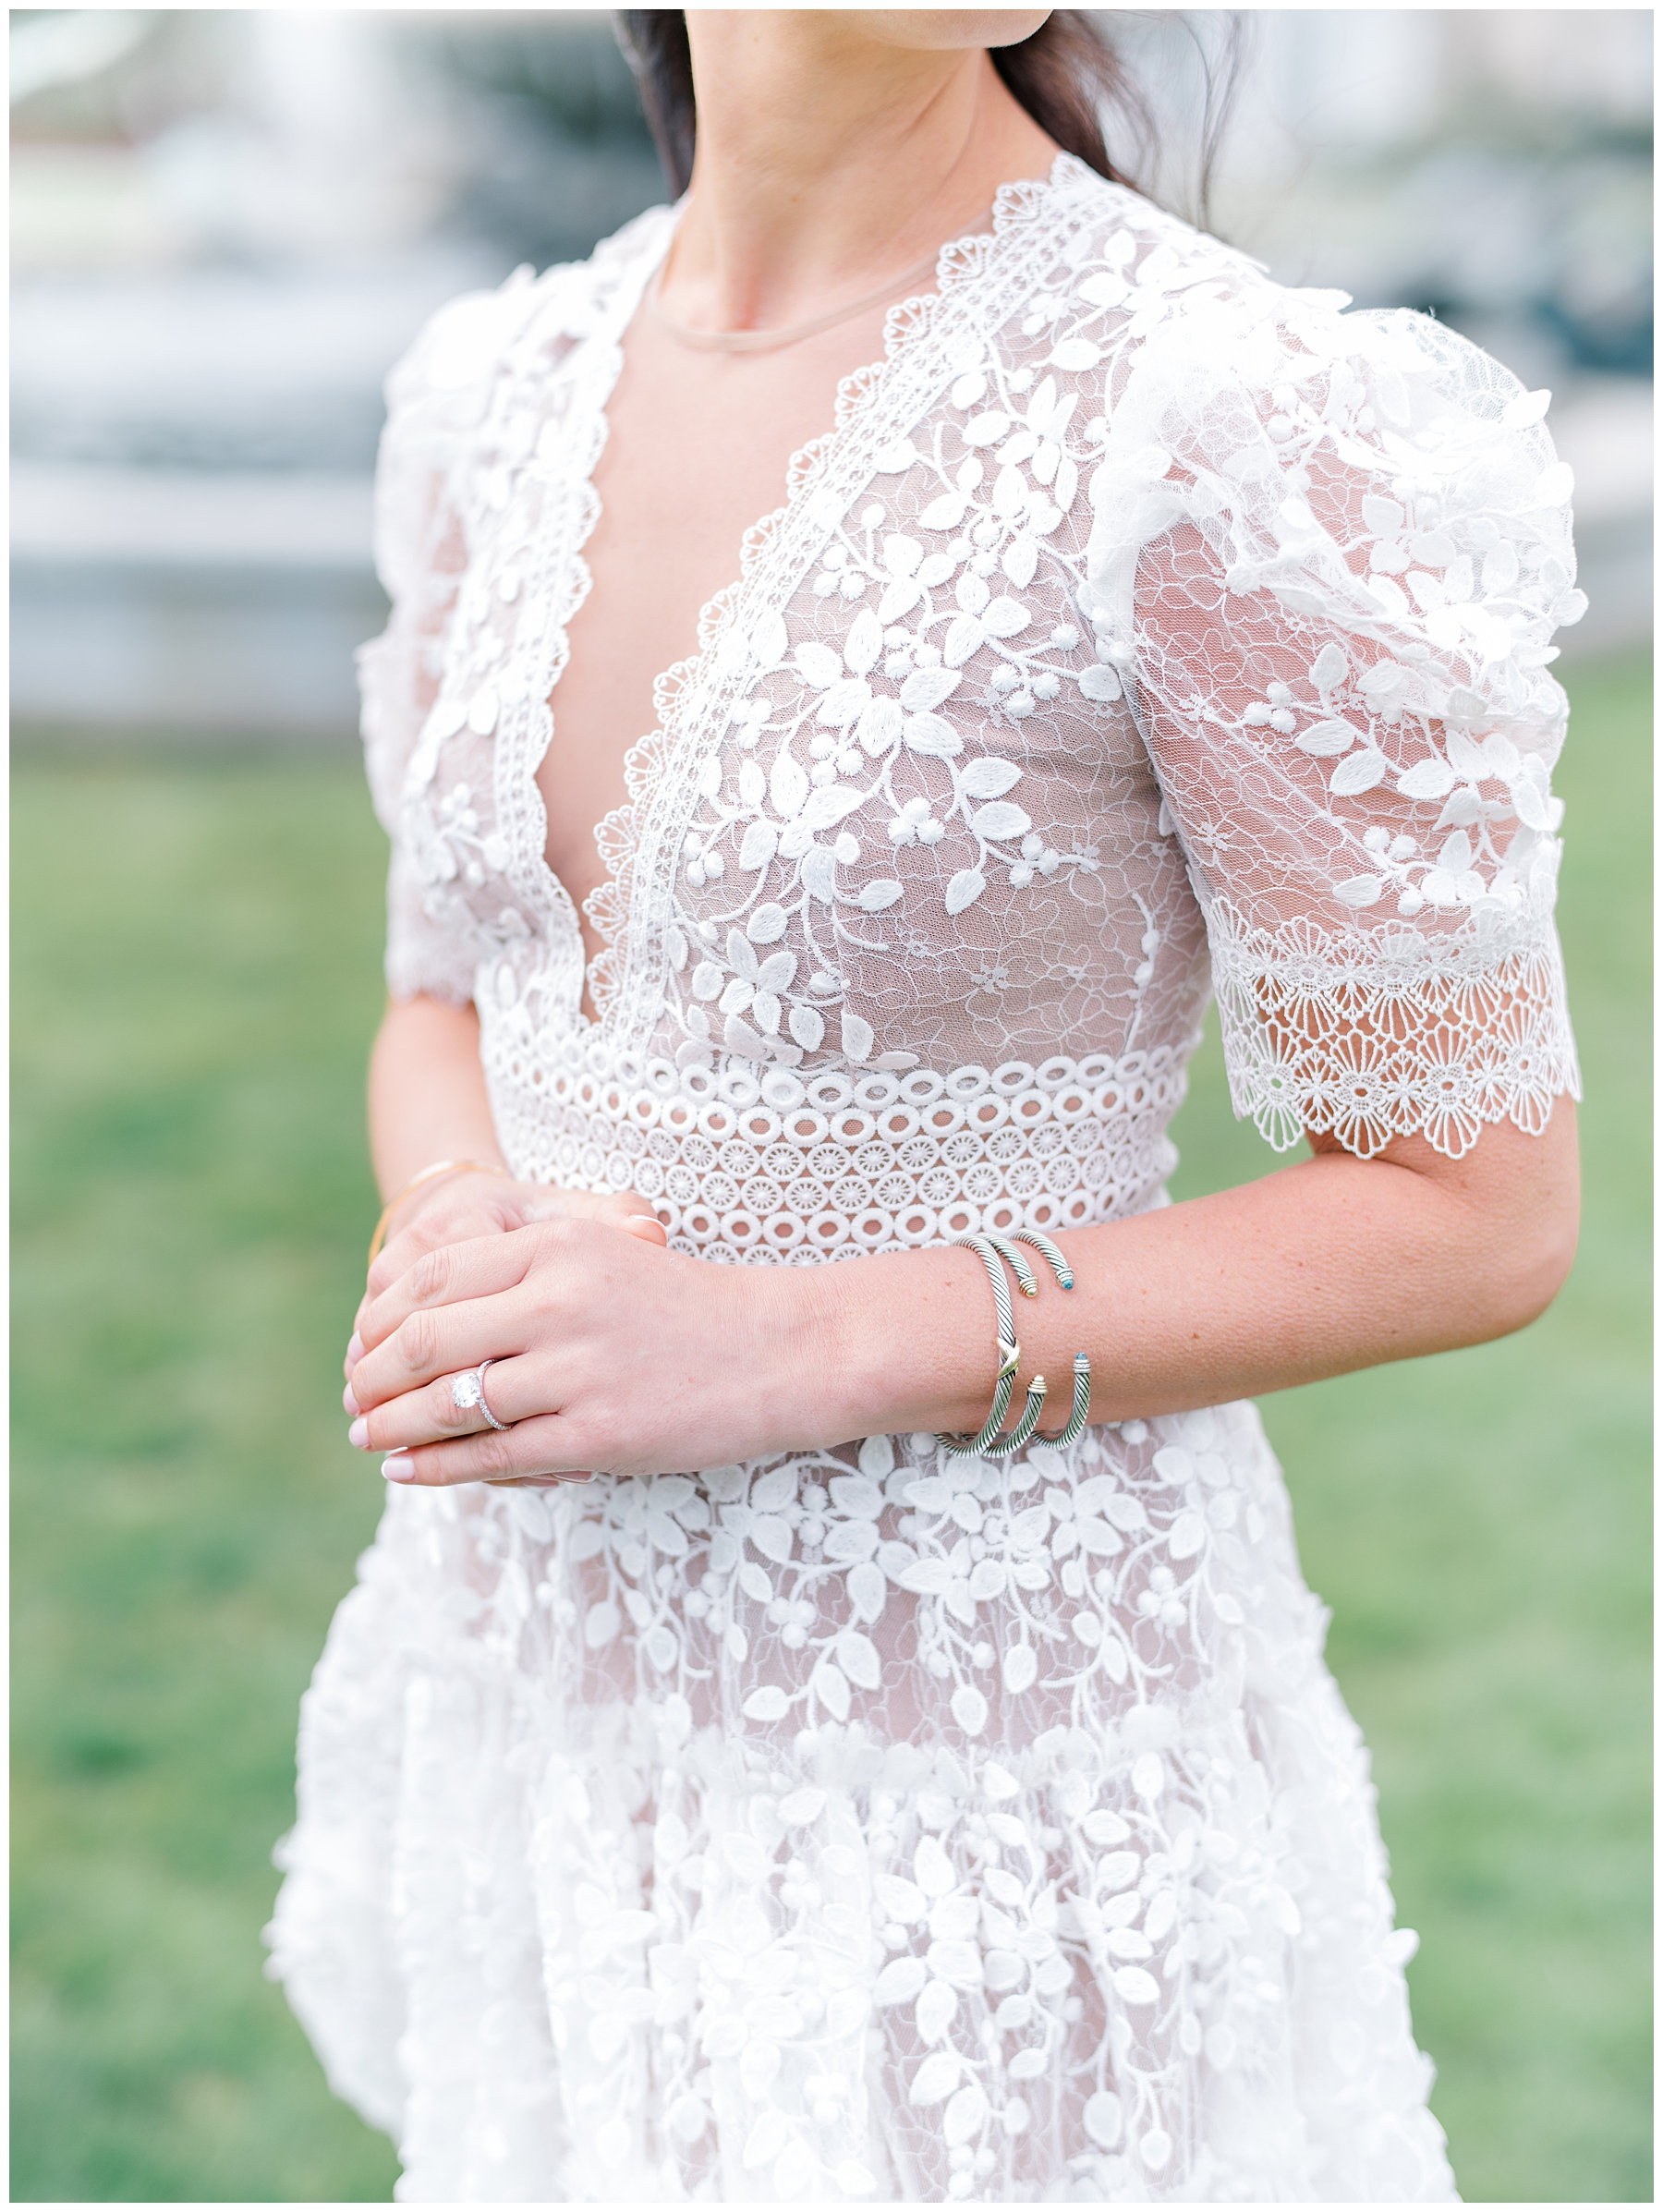 bride to be shows off white lace dress and engagement ring